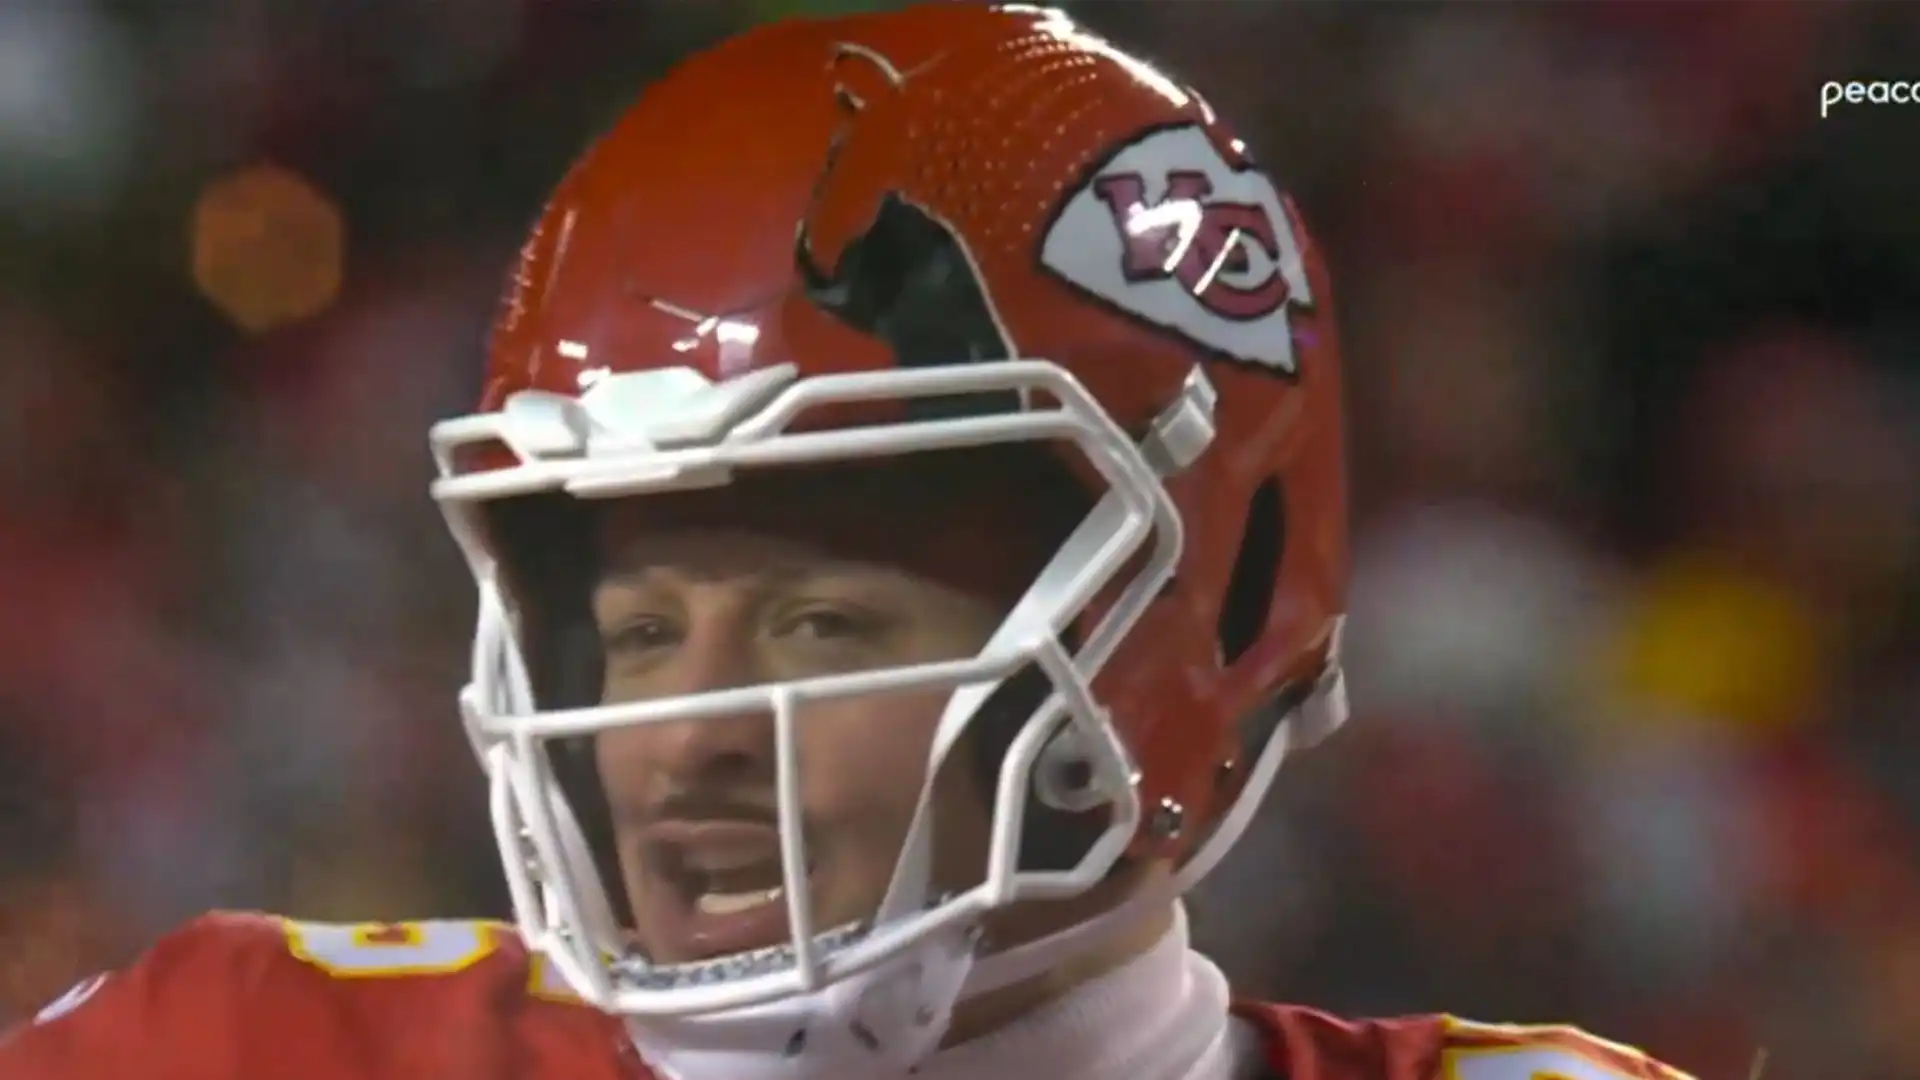 NFL fans spot optical illusion in Patrick Mahomes' helmet - Chiefs star's incredible sighting